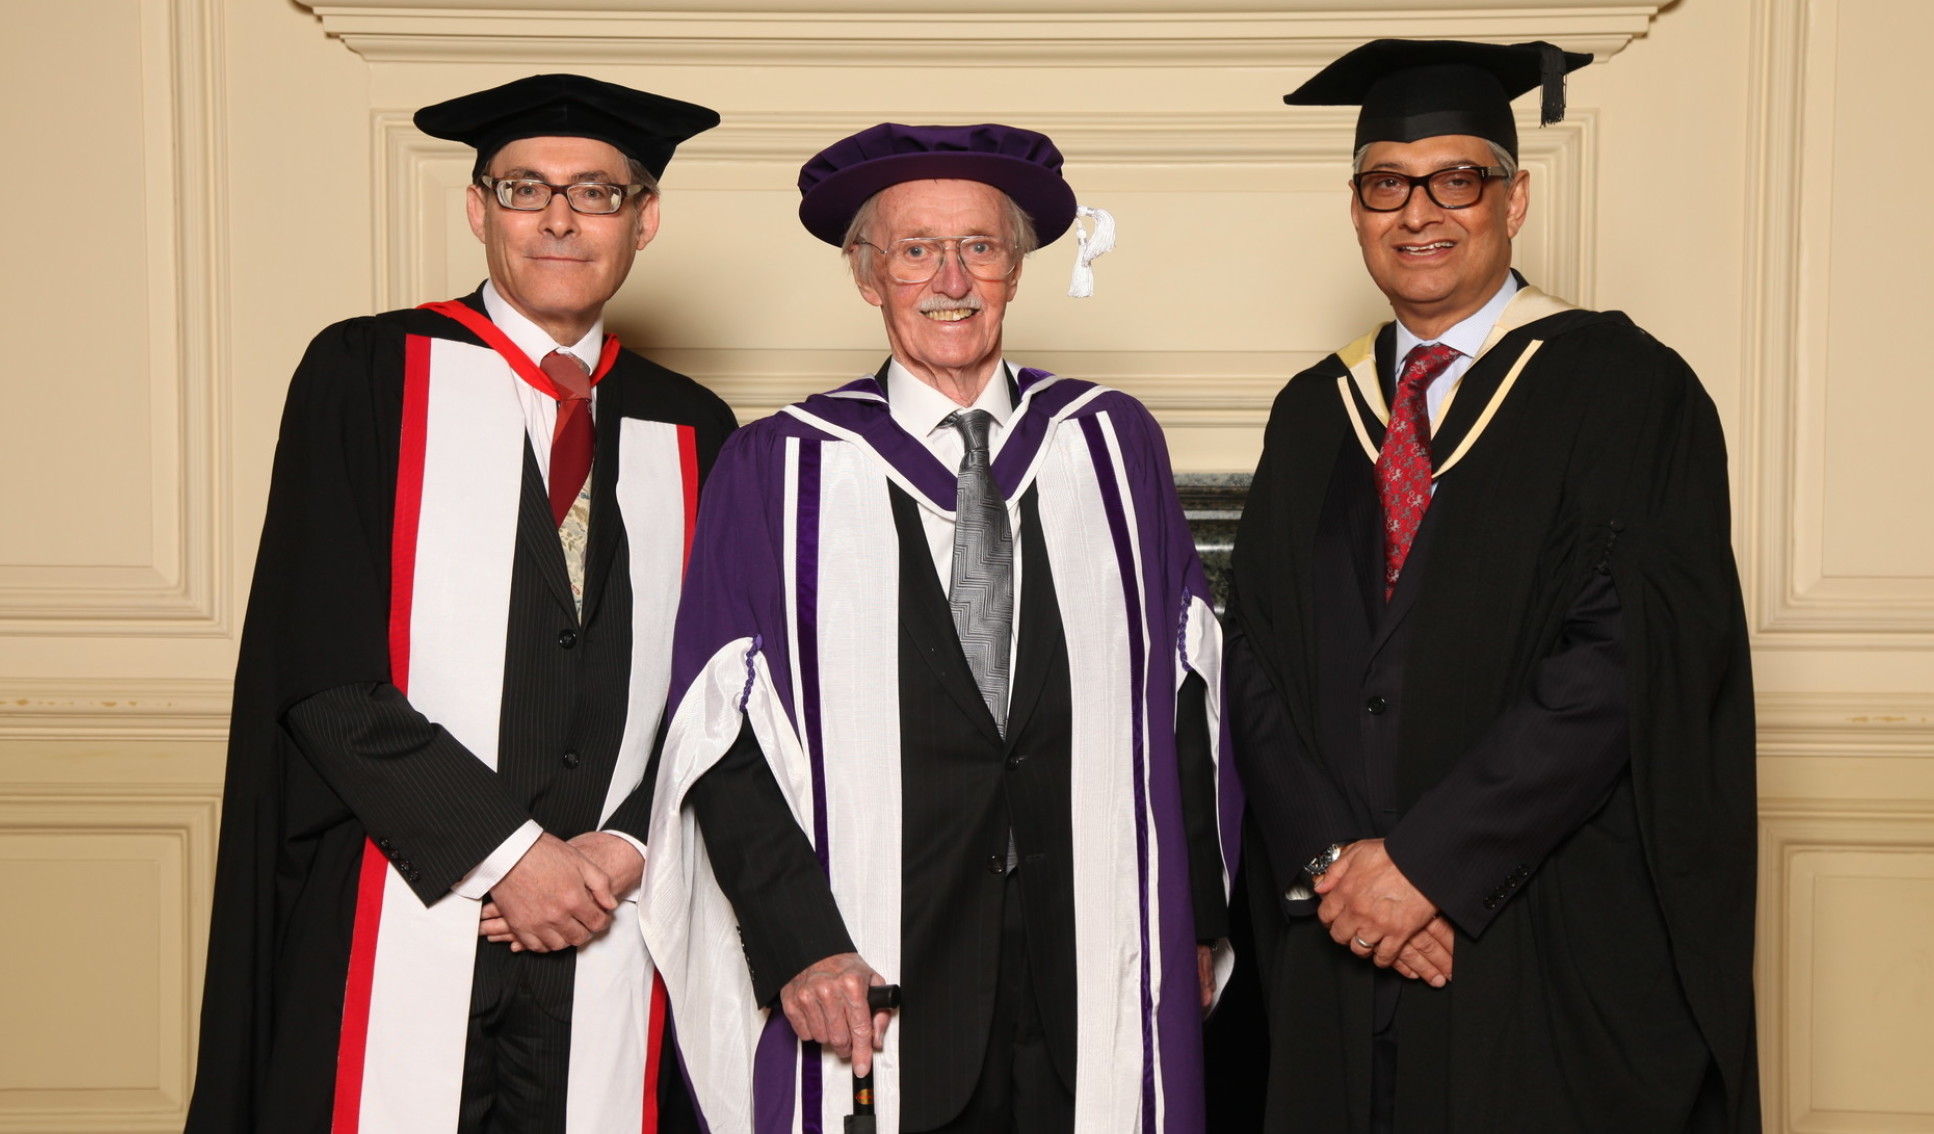 Dr Rodney Eastwood, Emeritus Professor Brian Spalding and Mr Rajive Kaul (left to right)